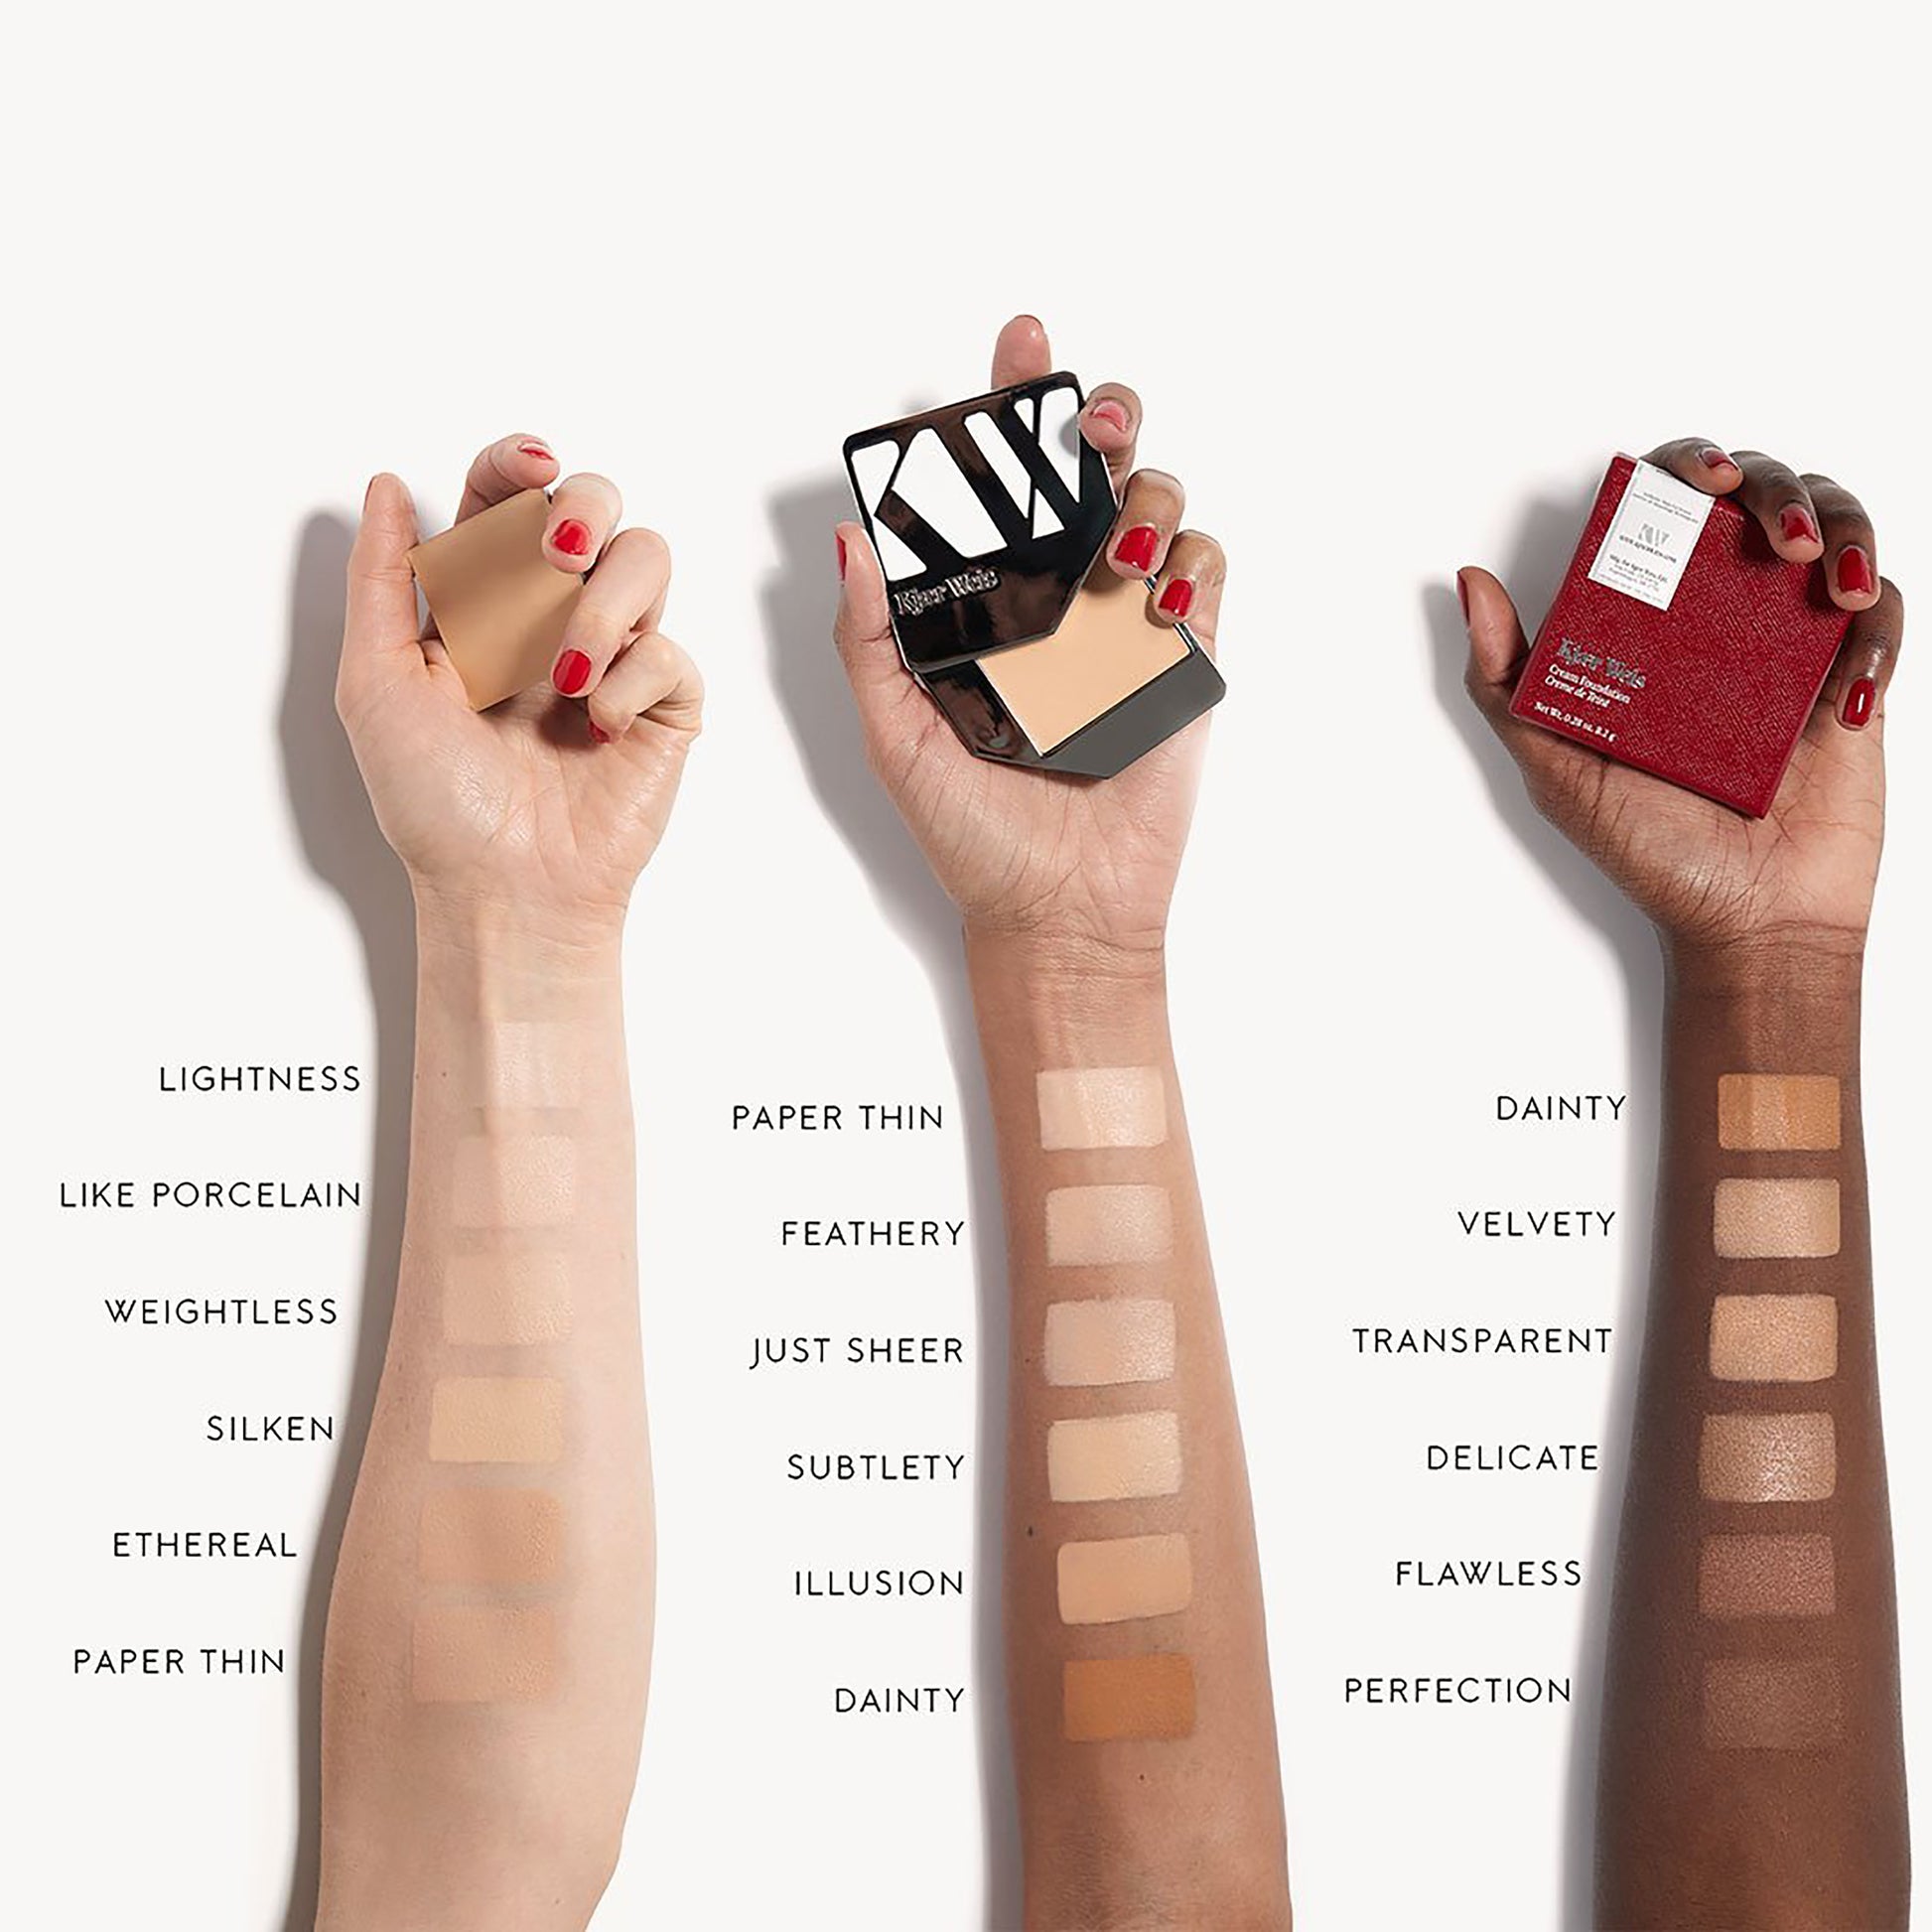 Three arms of three different skin tones all with a swatch of cream foundation from darkest to lightest shade. Ethereal is the second-darkest shade on the lightest skin tone.  